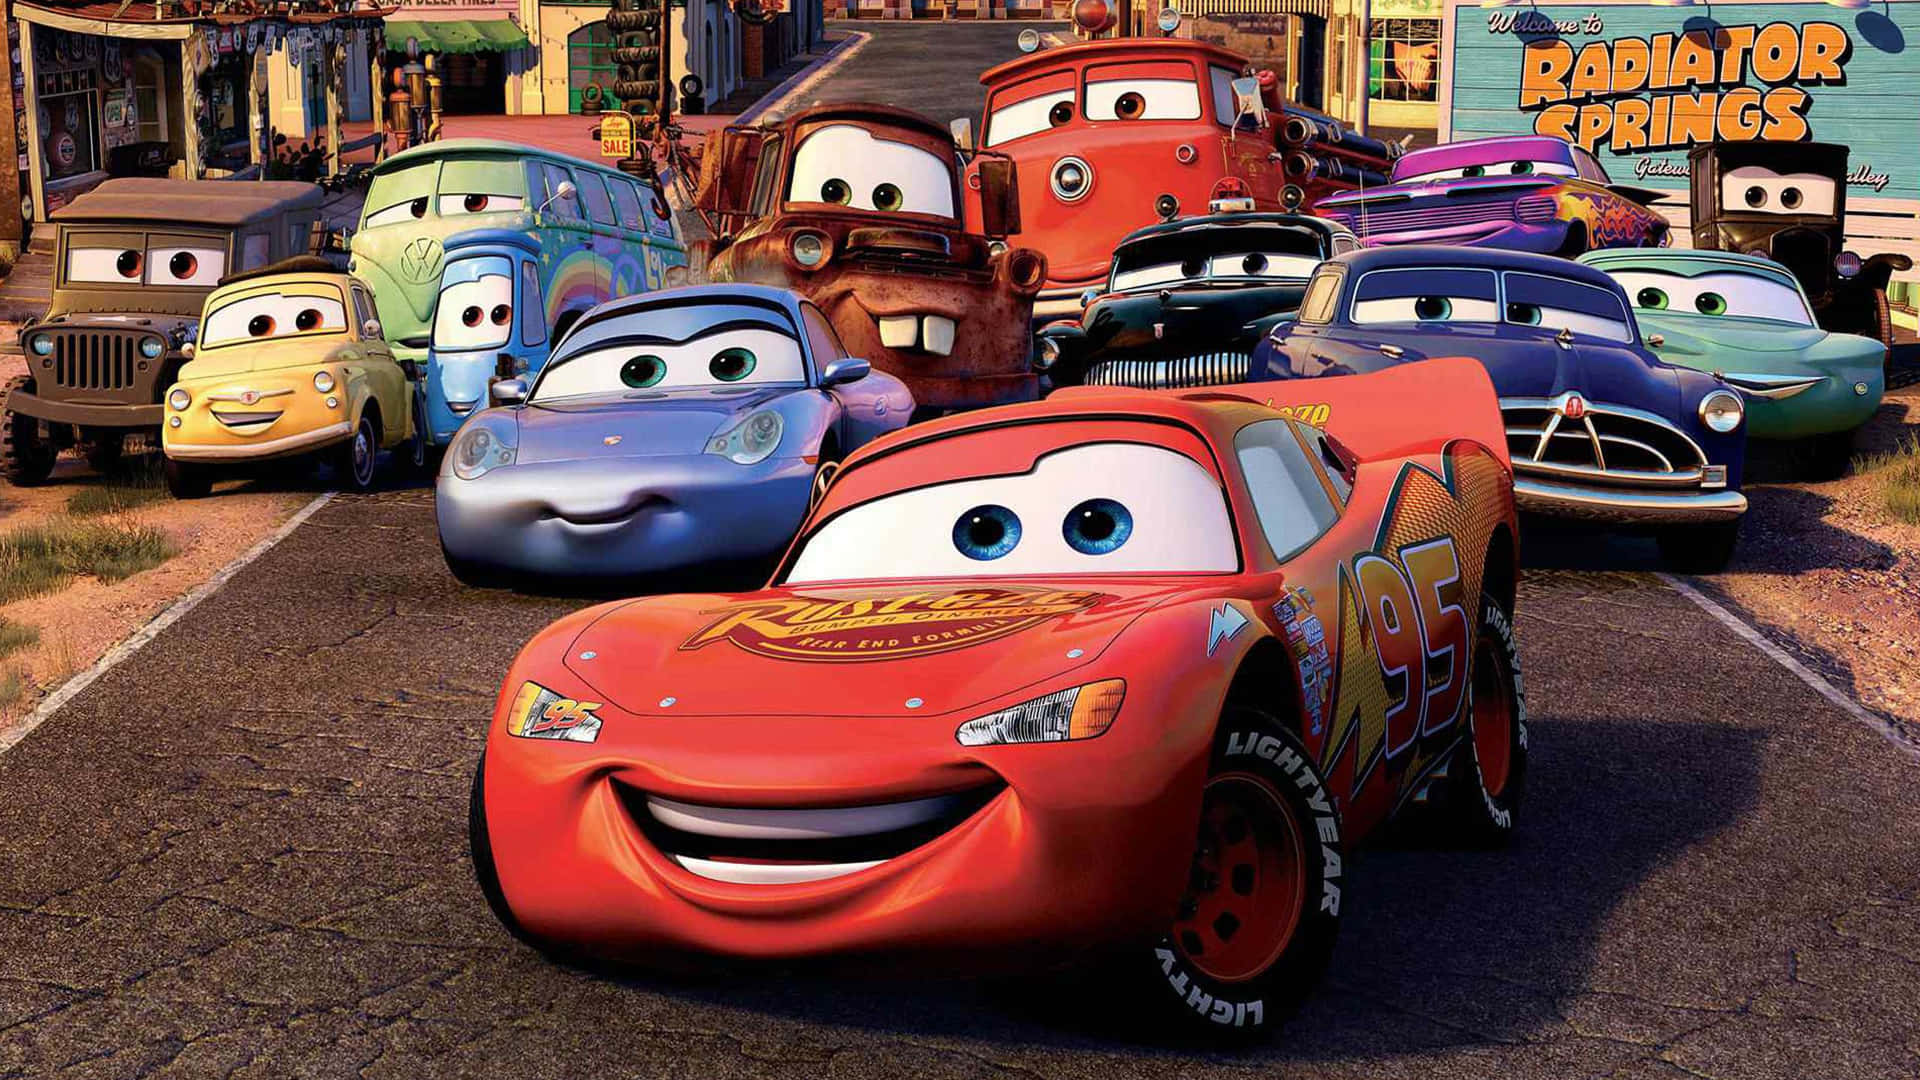 Lightning McQueen and Mater reunite for Cars 2